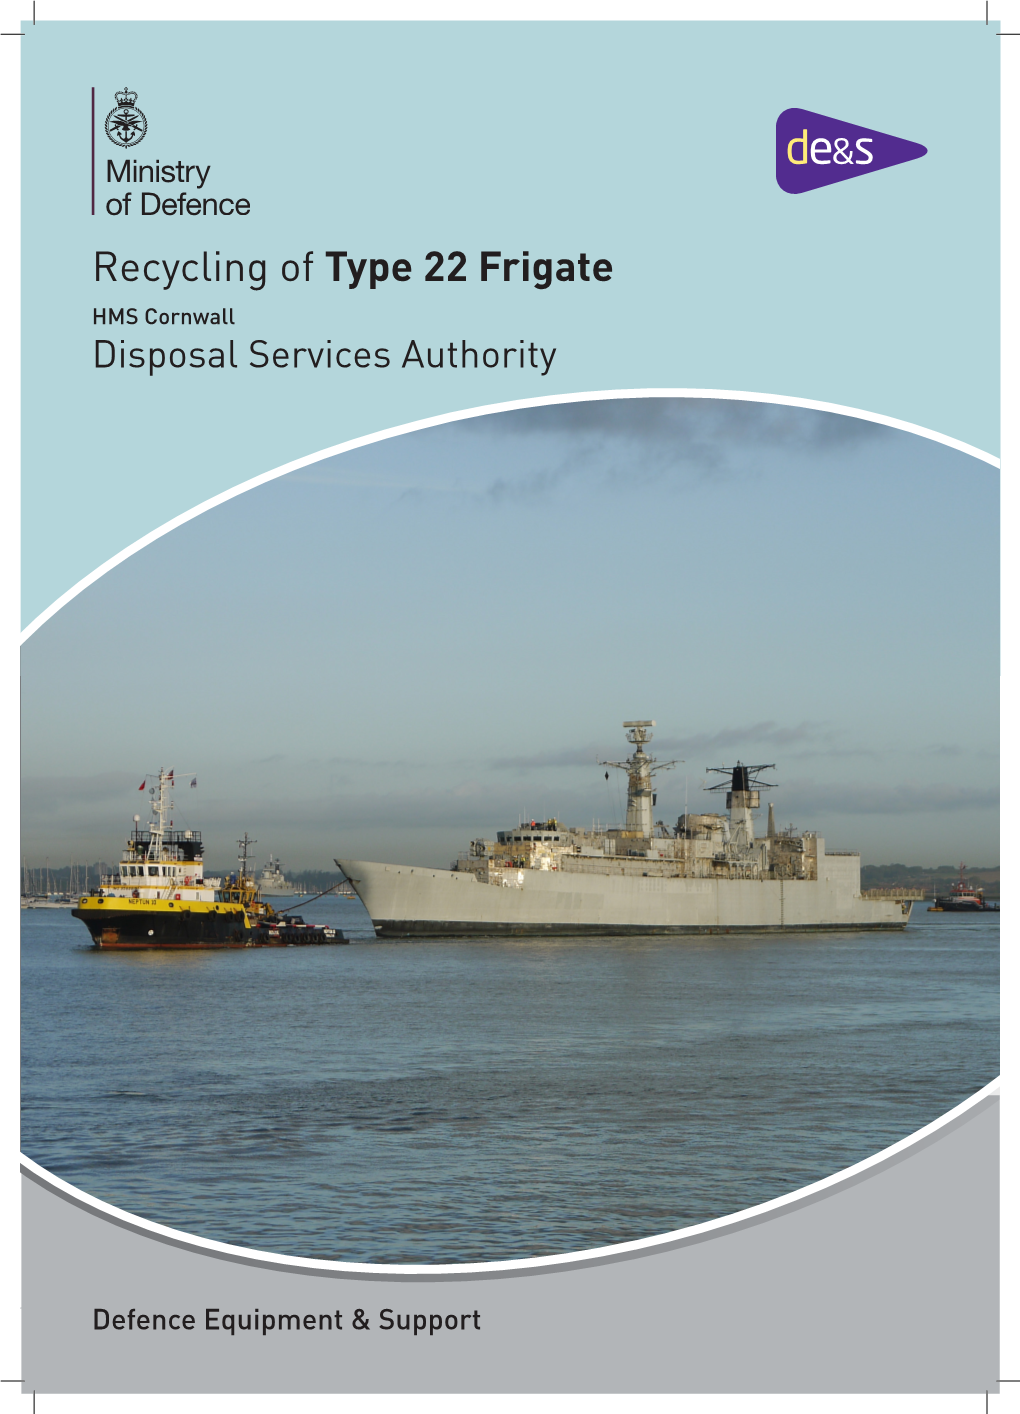 Recycling of HMS Cornwall